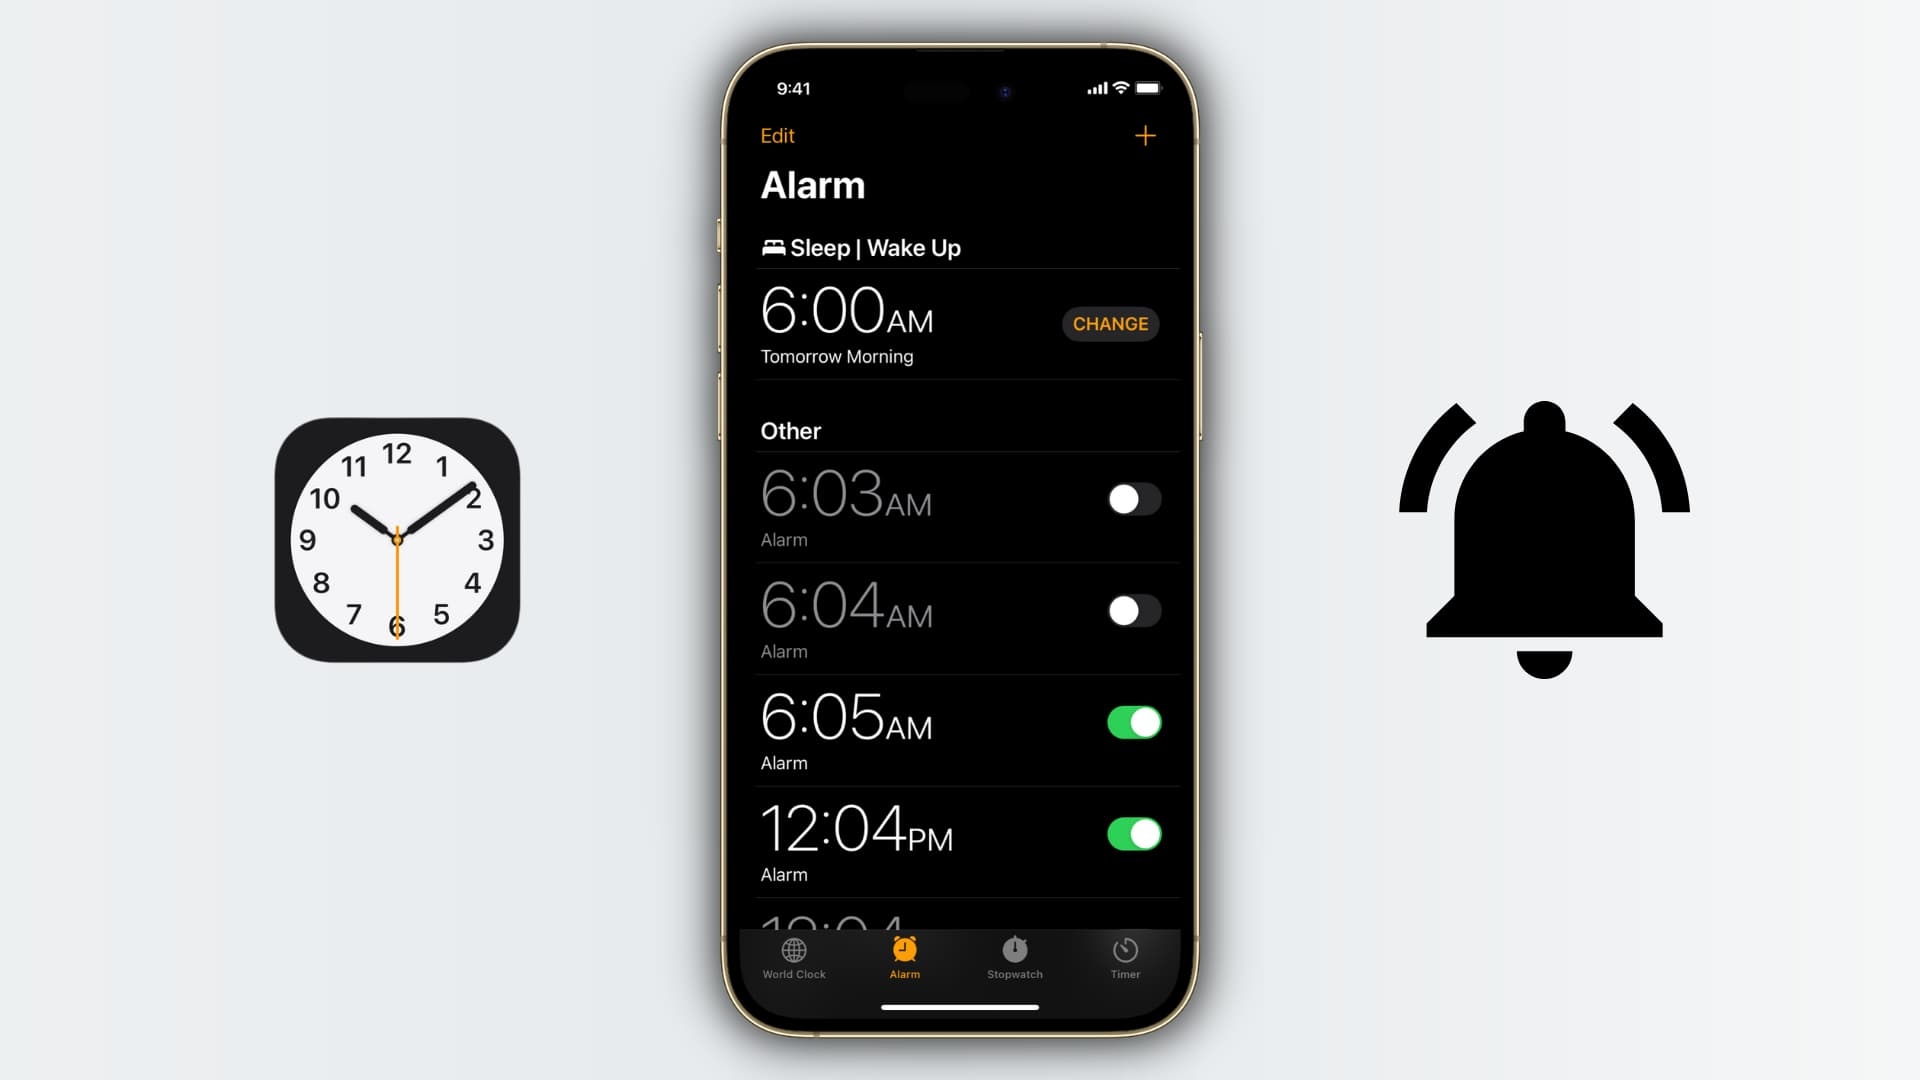 Apple Addresses iPhone Alarm Issues: Users Report Alarms Playing Too Quietly or Not Going Off